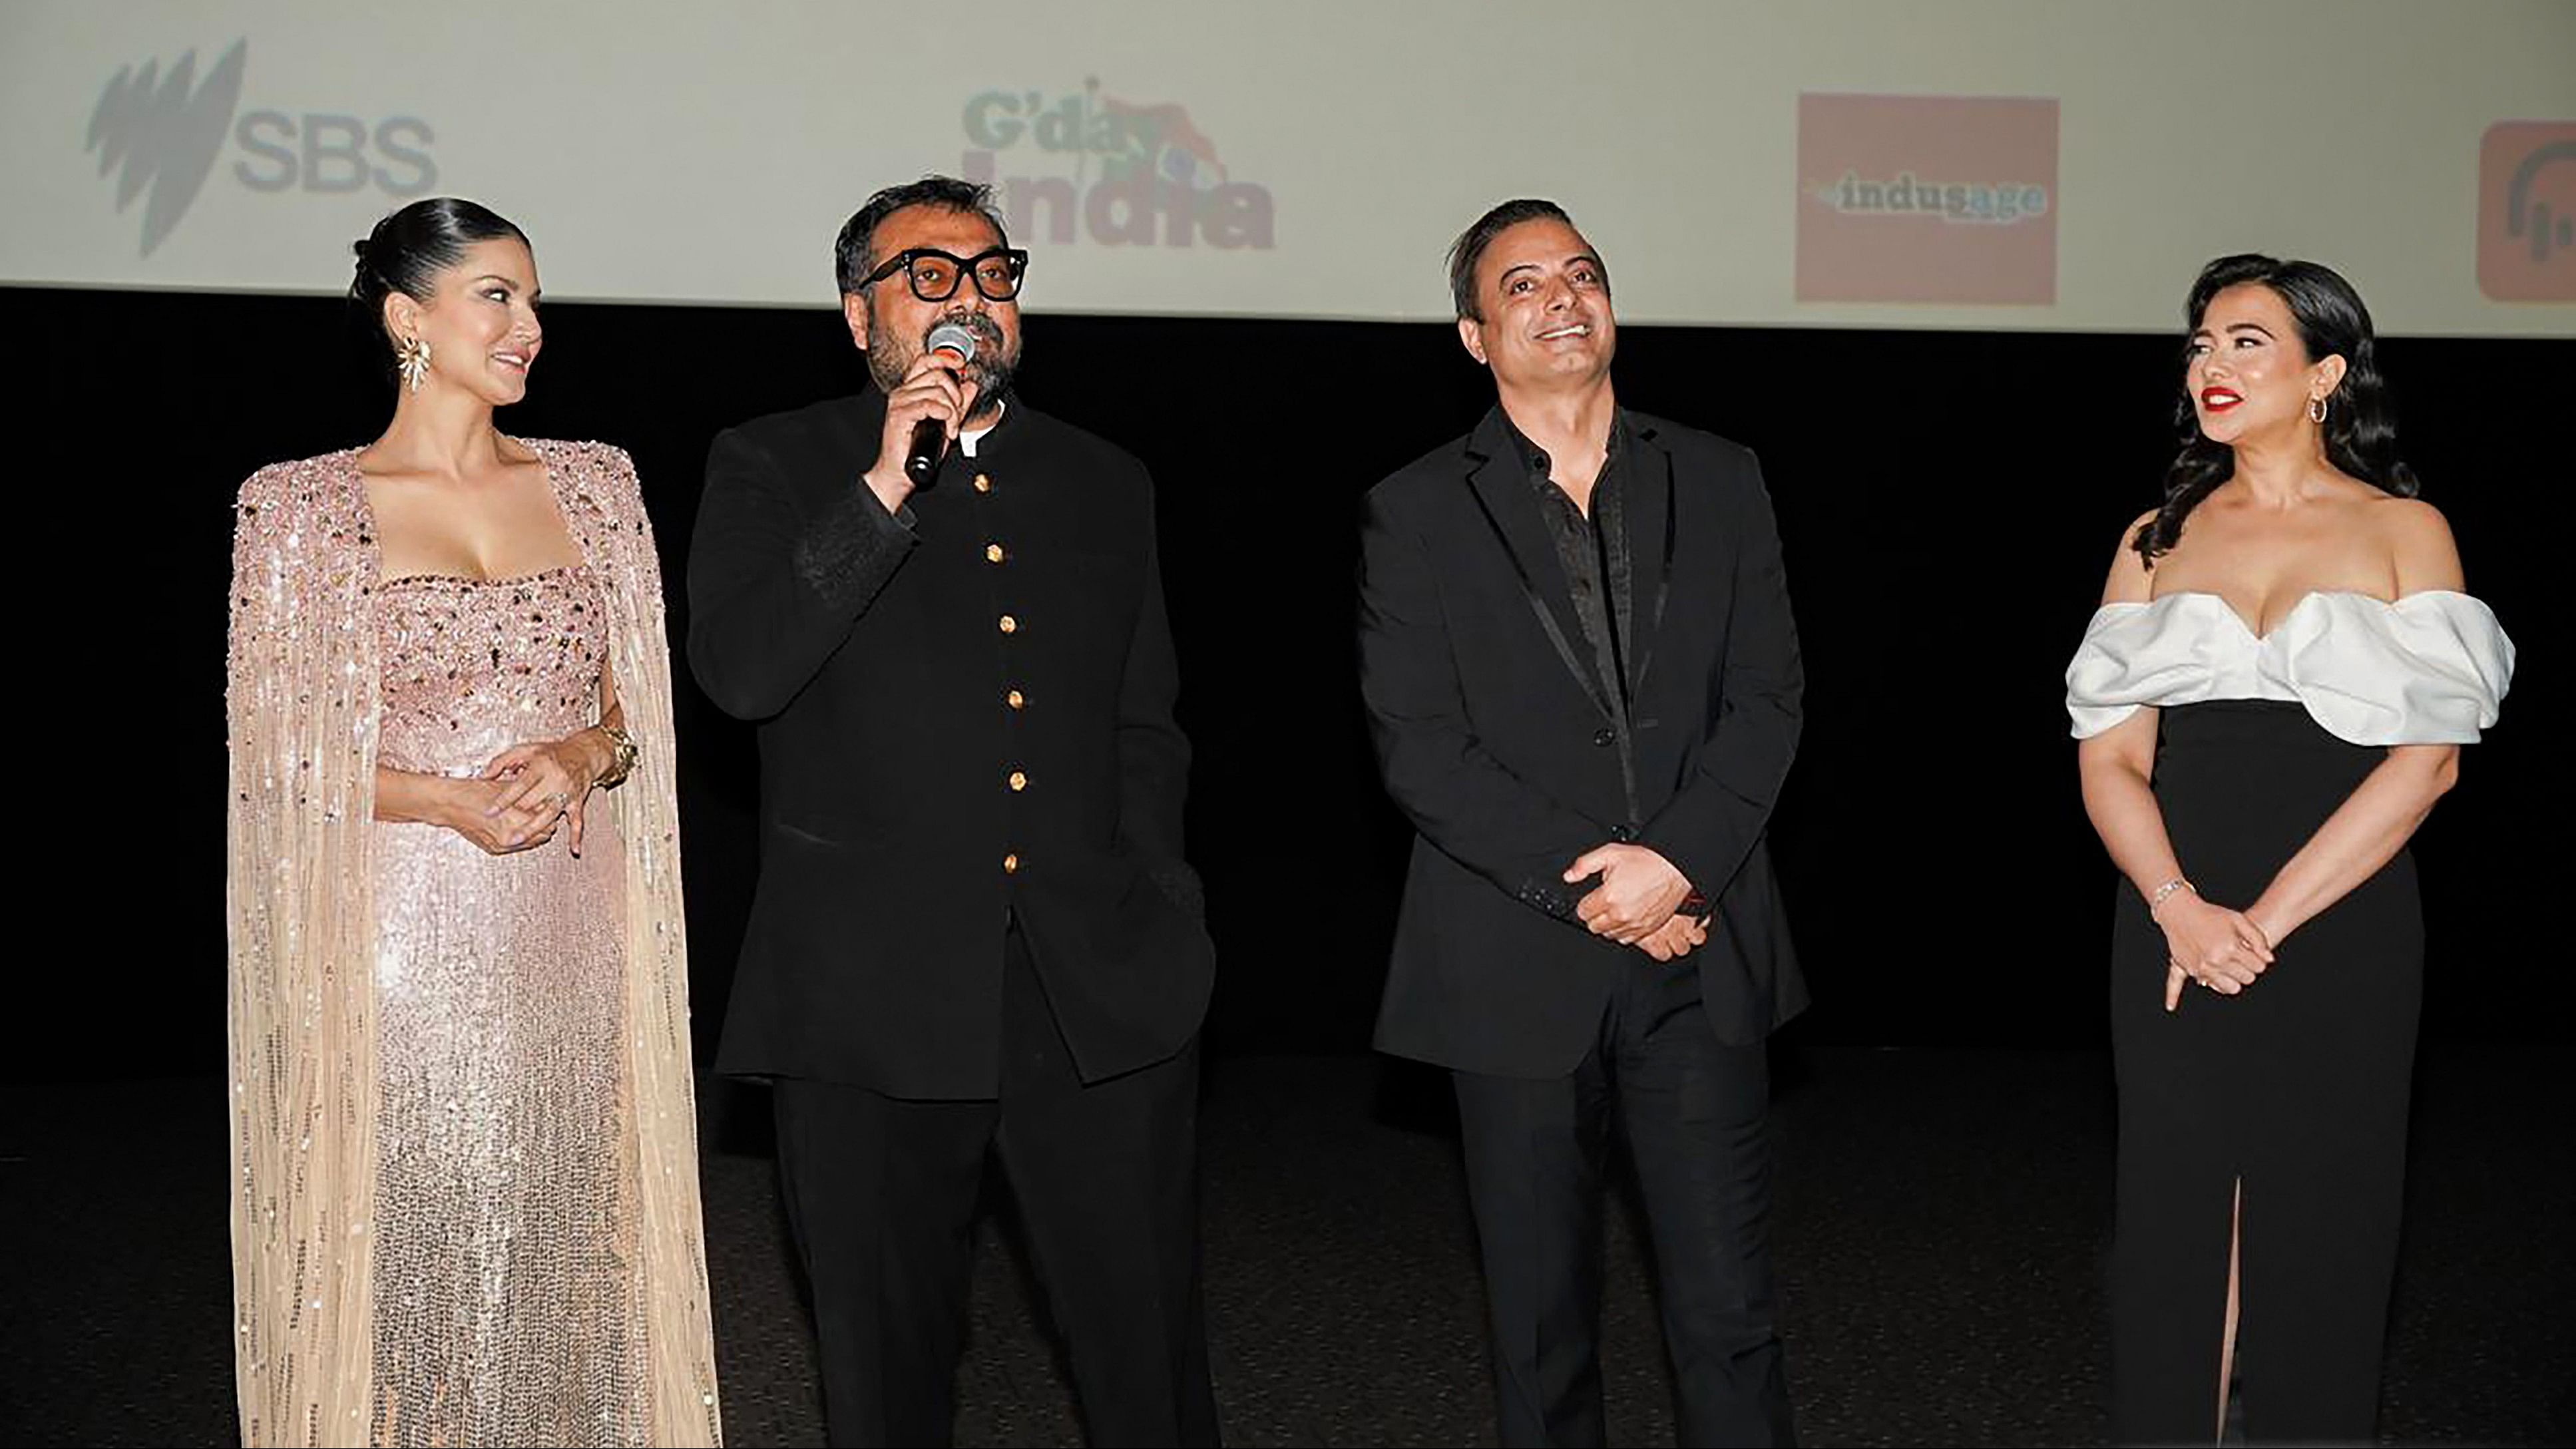 <div class="paragraphs"><p>Filmmaker Anurag Kashyap with actors Sunny Leone, Rahul Bhat and Jeniffer Piccinato at the screening of their film 'Kennedy' at Indian Film Festival of Melbourne (IFFM).</p></div>